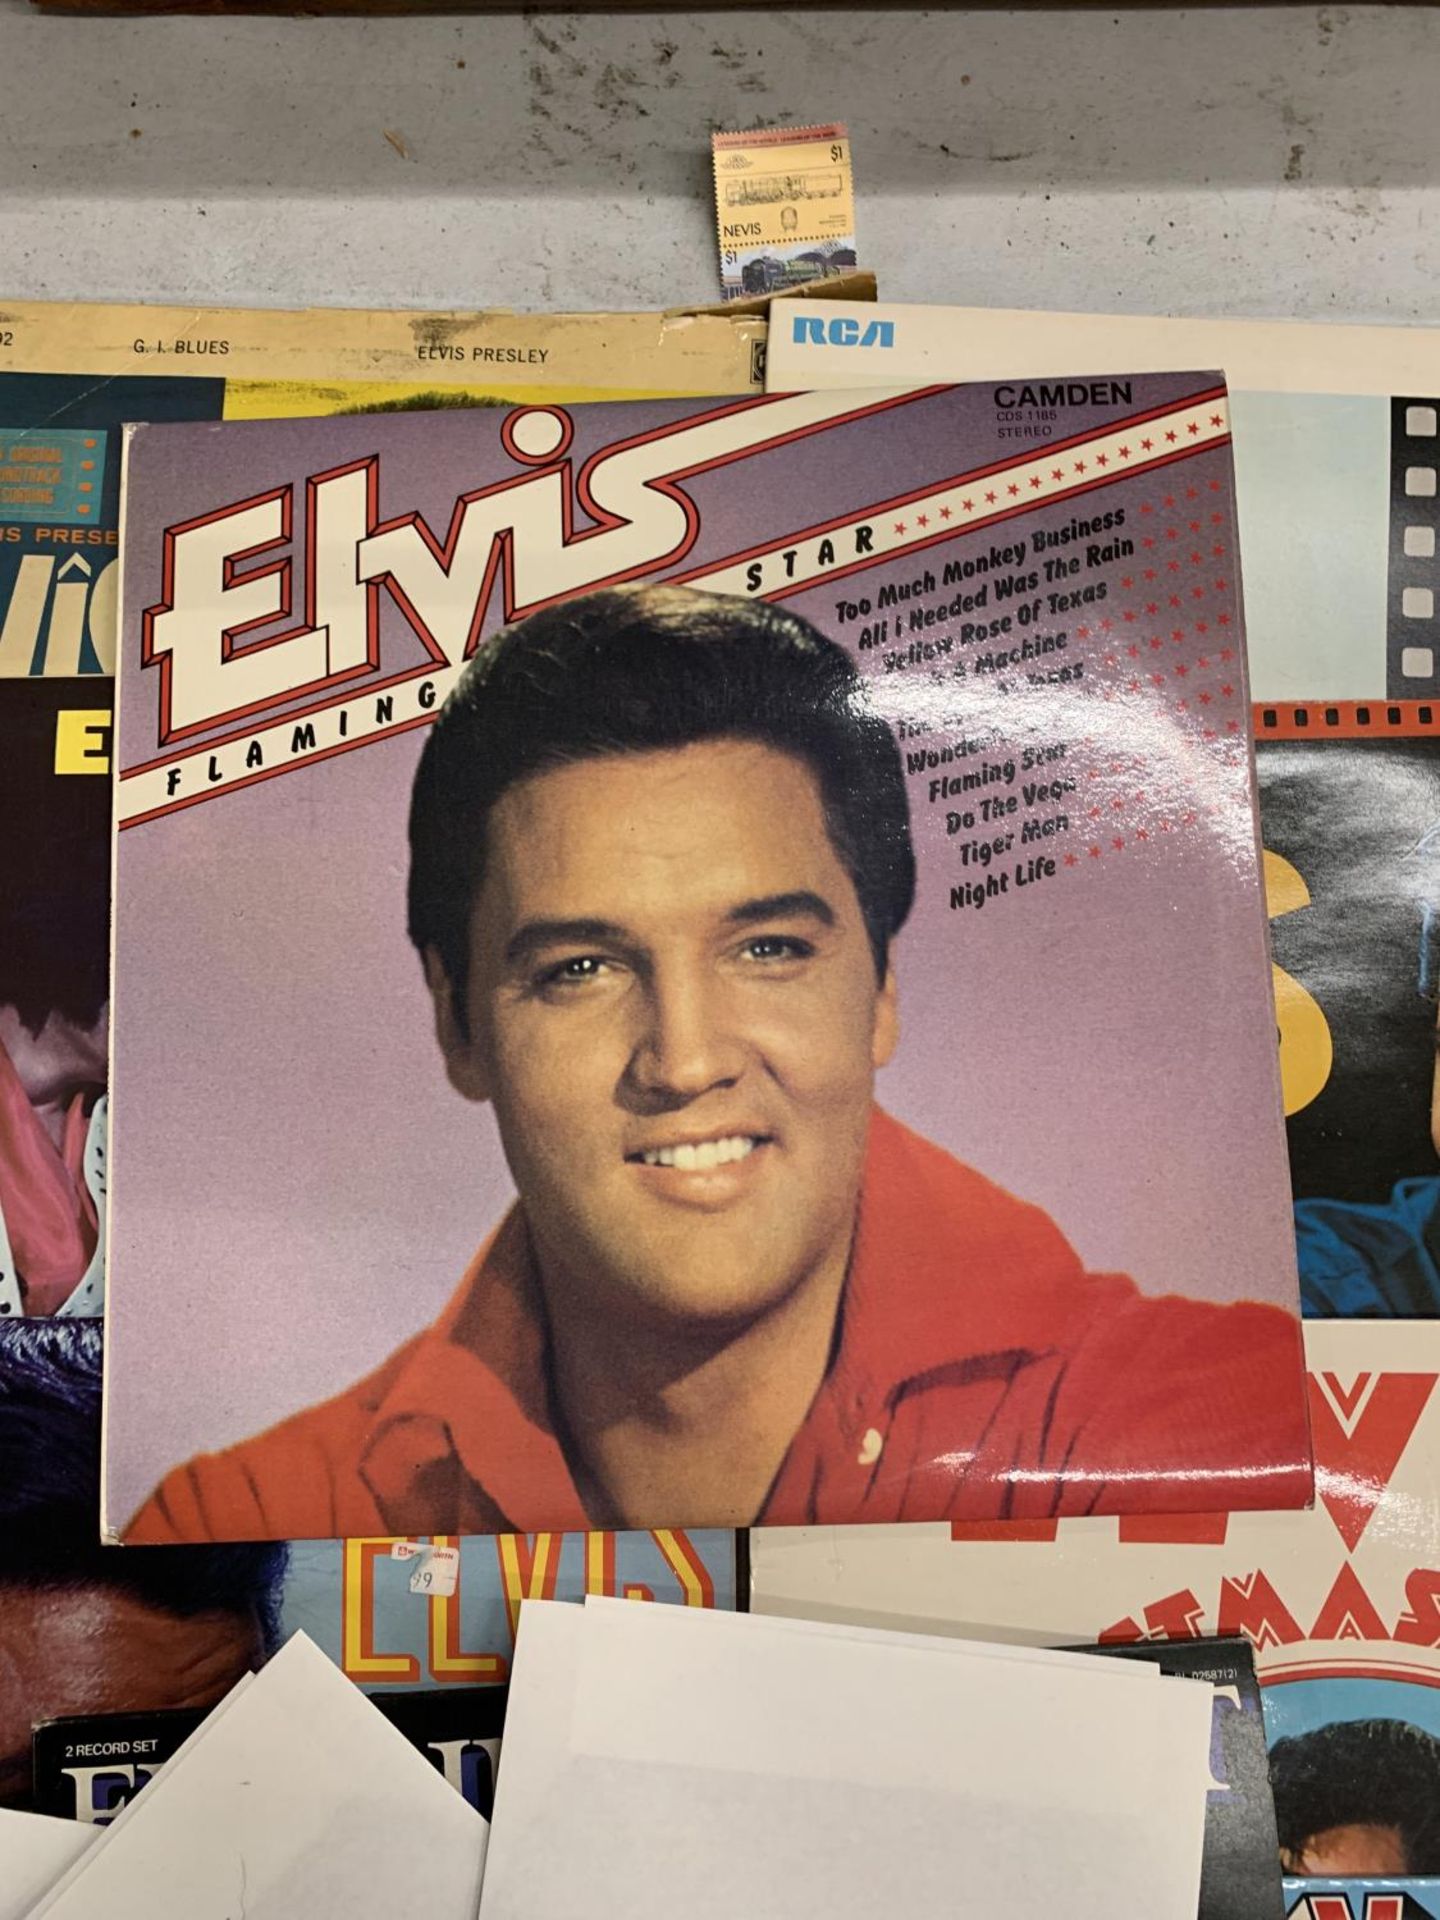 A LARGE COLLECTION OF ELVIS PRESLEY LPS AND SINGLES ON VINYL - Image 2 of 3